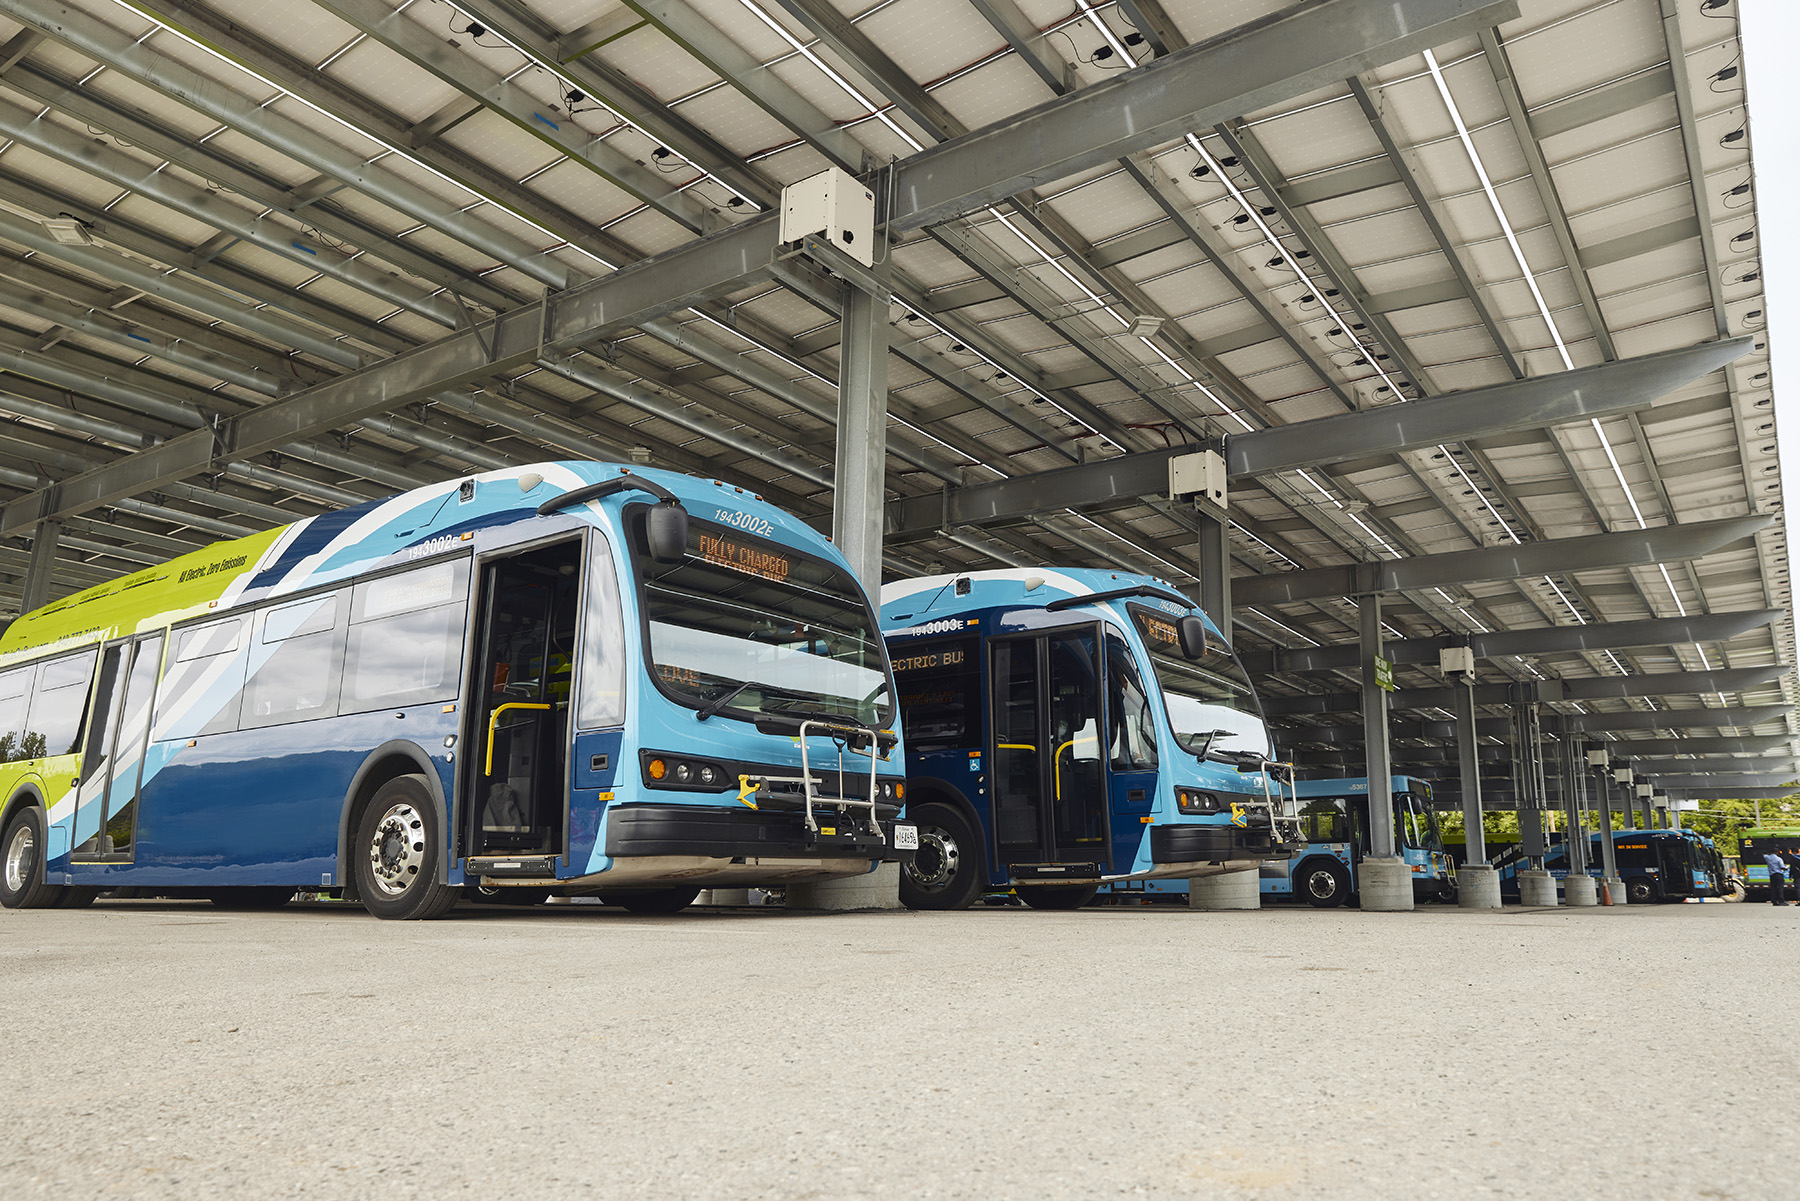 Engineers are essential to help transit agencies electrify fleets